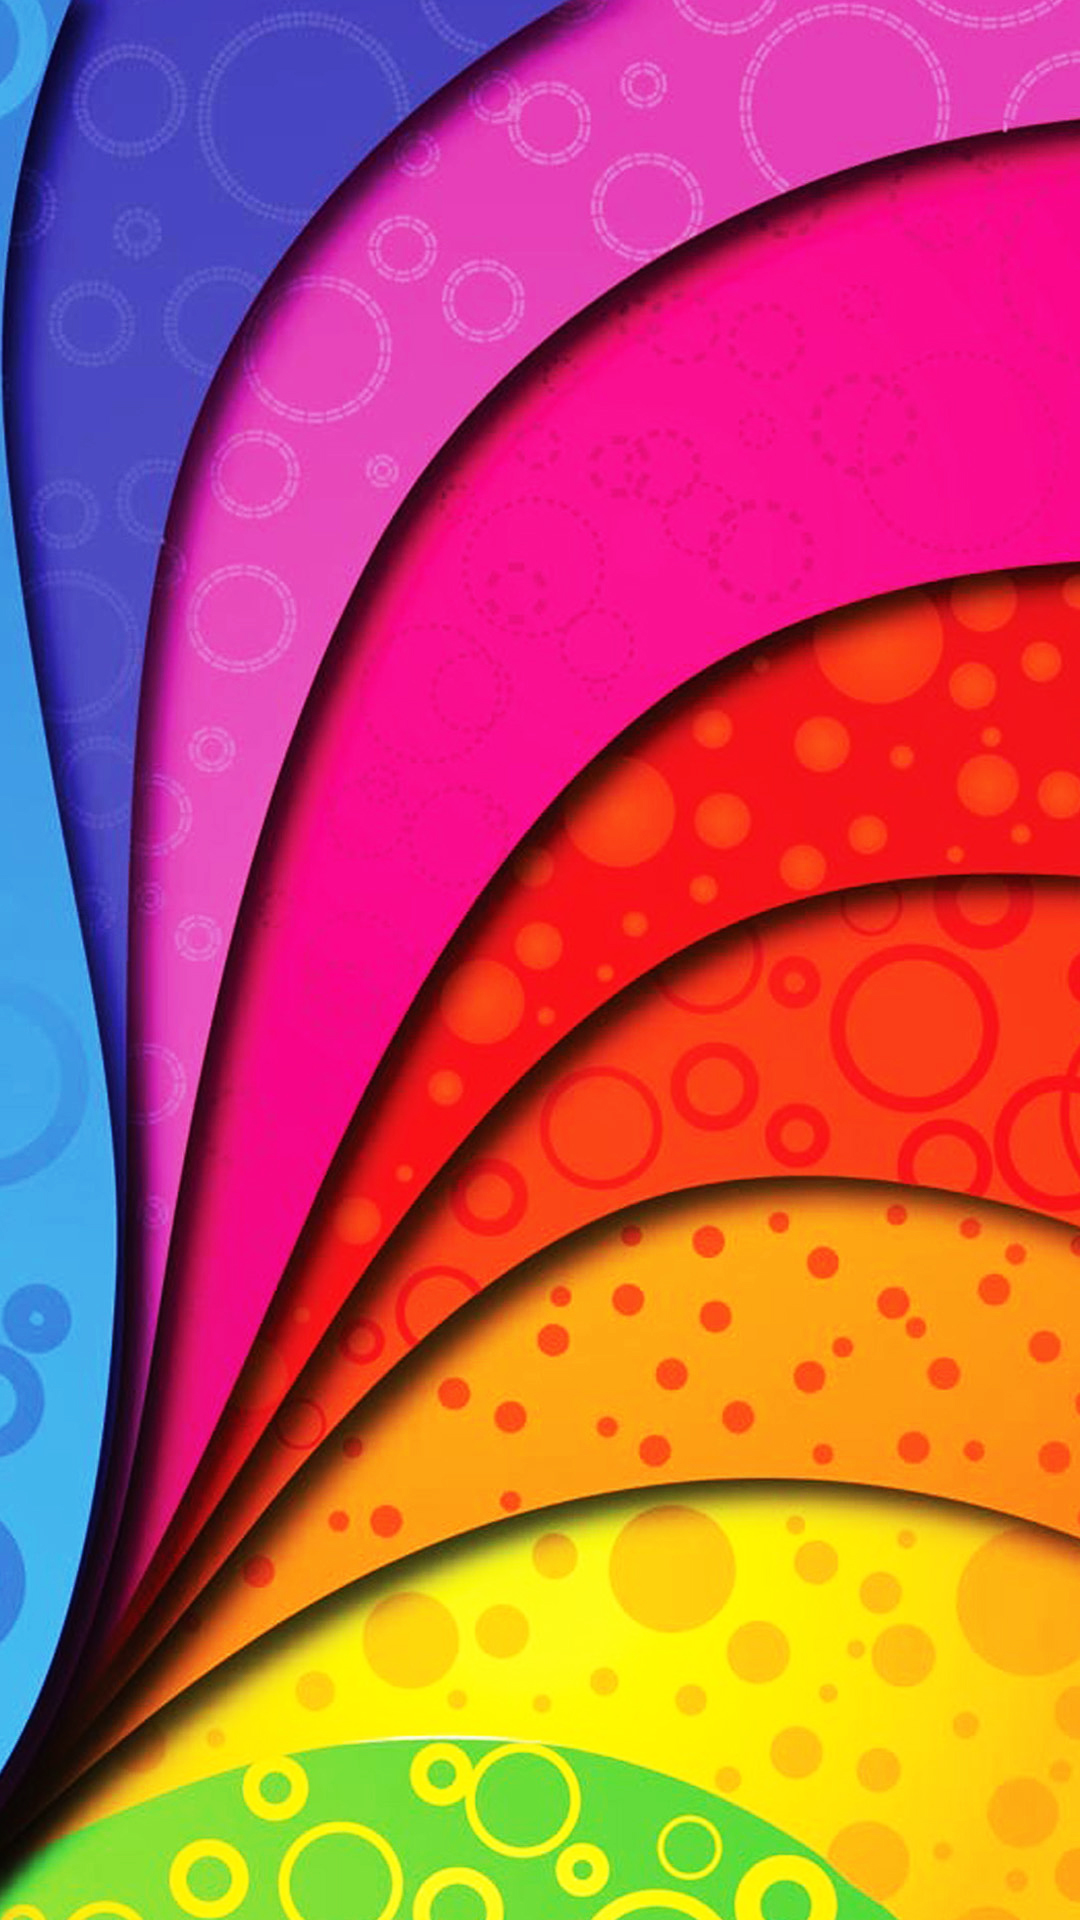 colorful wallpaper for android,orange,red,yellow,line,pink